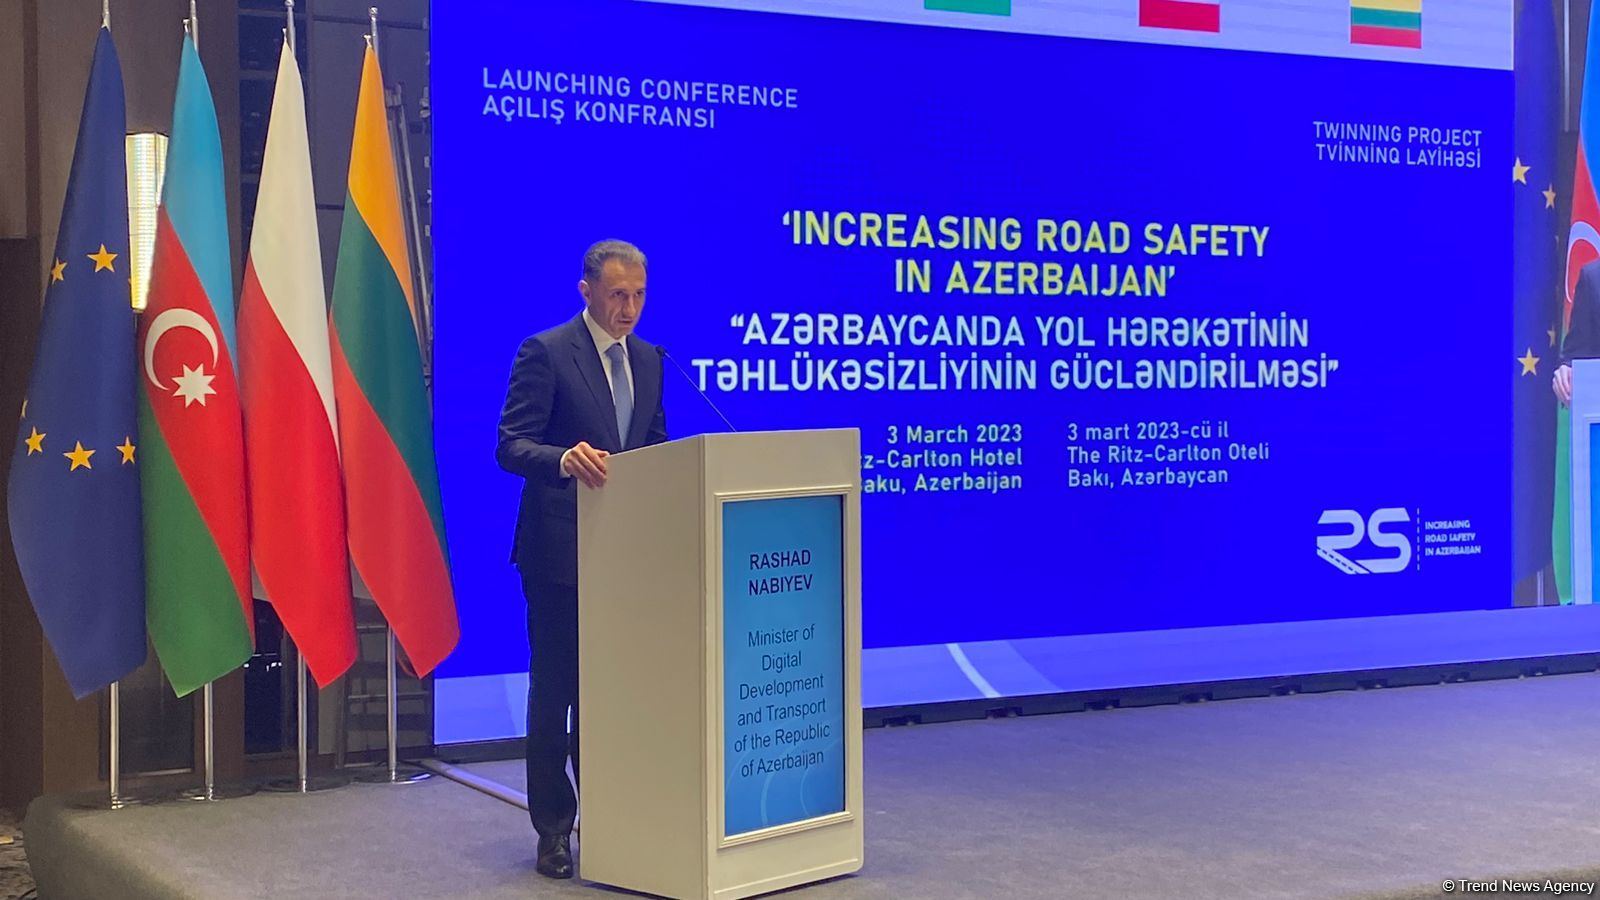 Azerbaijan to work on improving its road safety with help of Poland, Lithuania